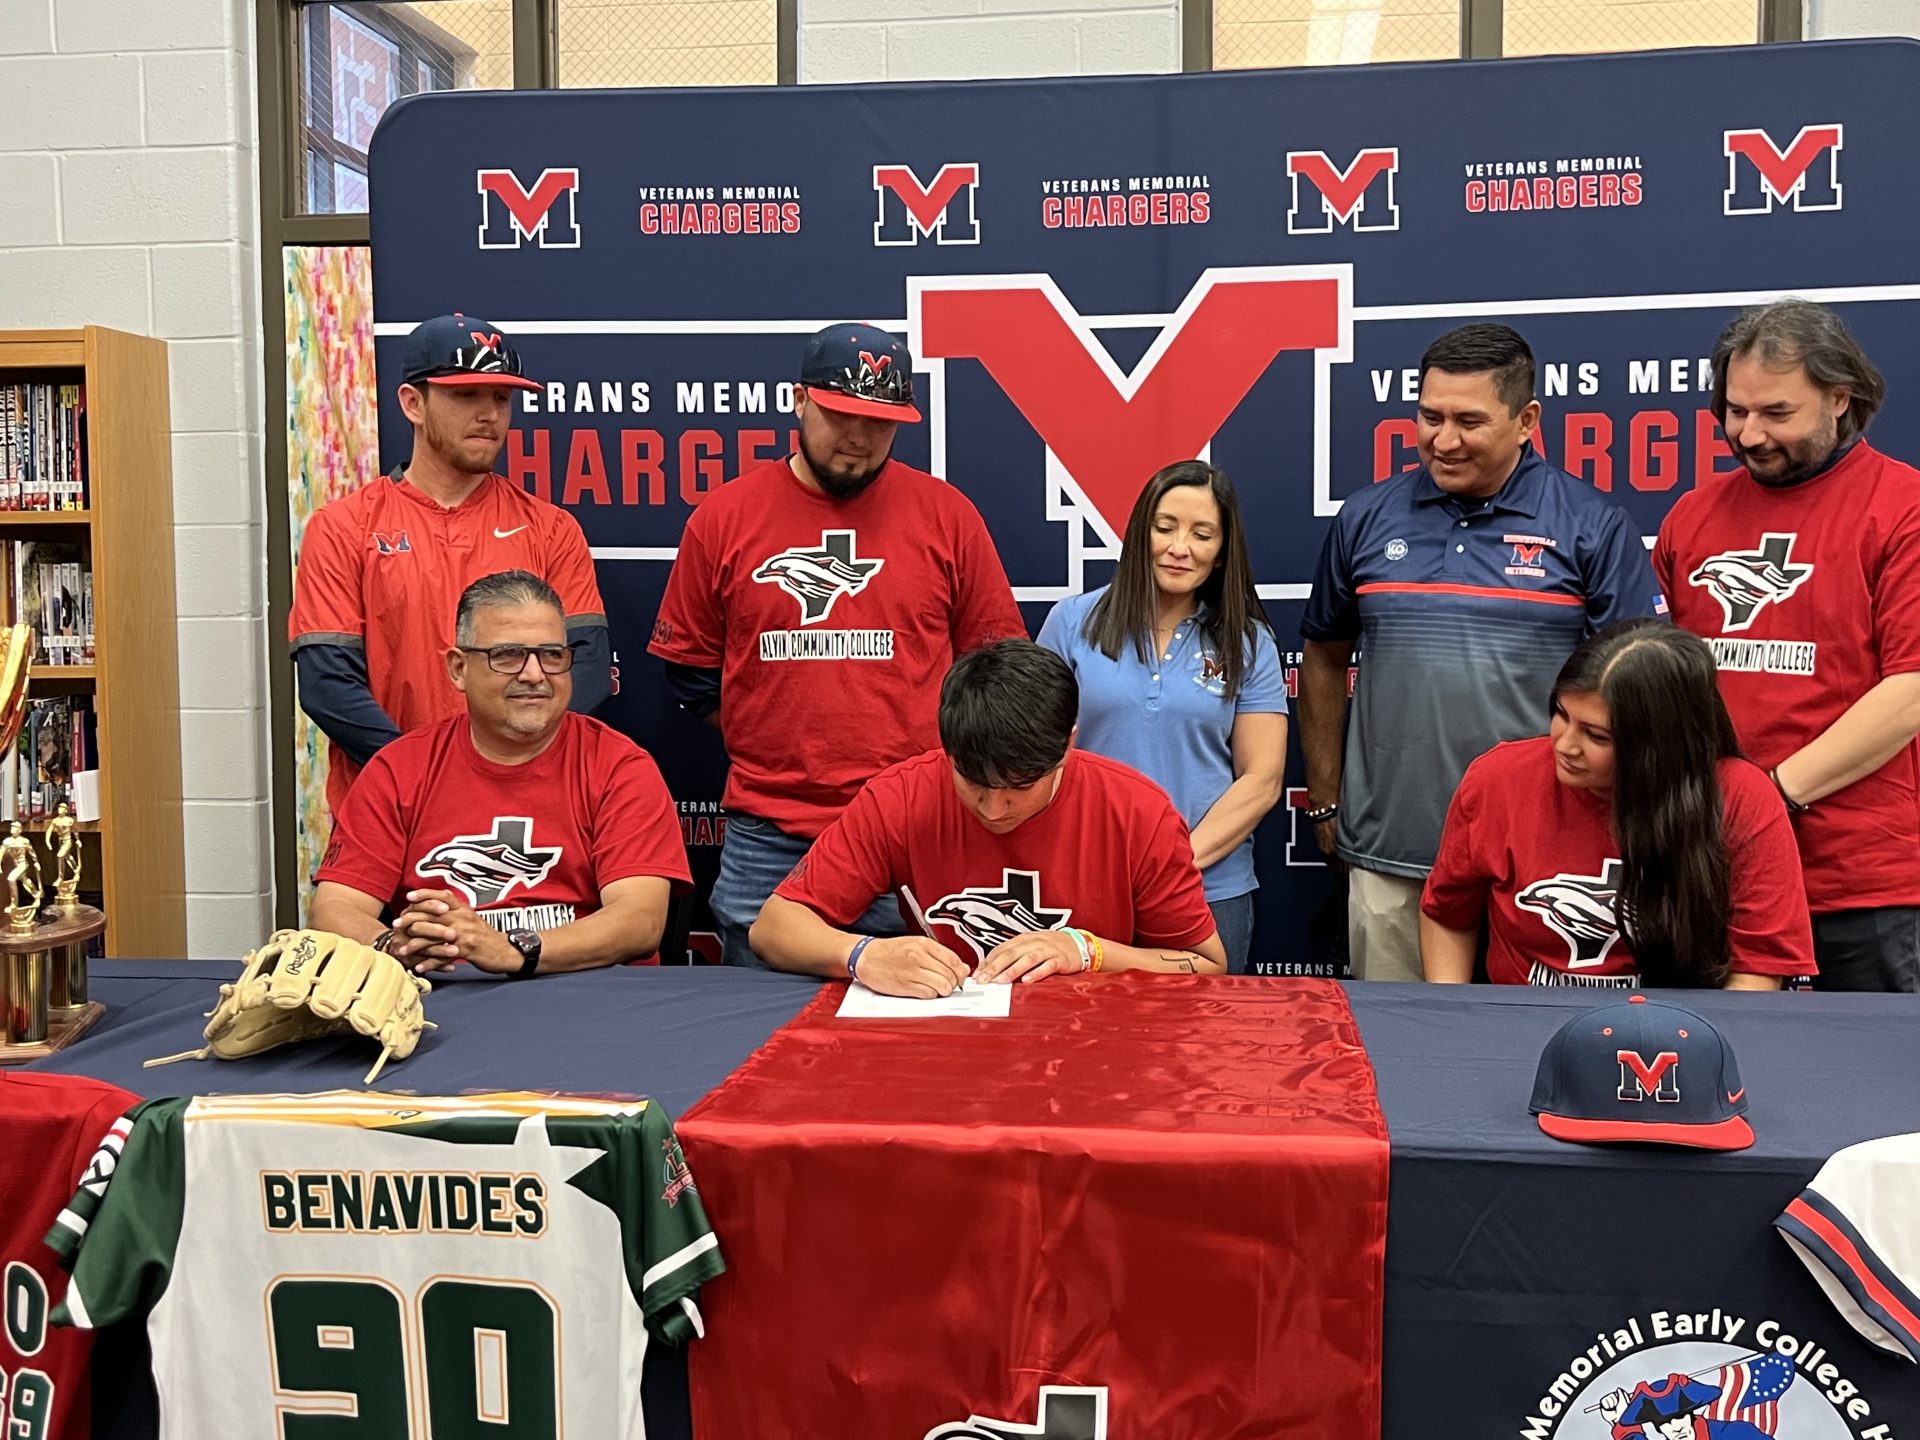 Garza has lofty goals for Chargers as he signs to play college baseball